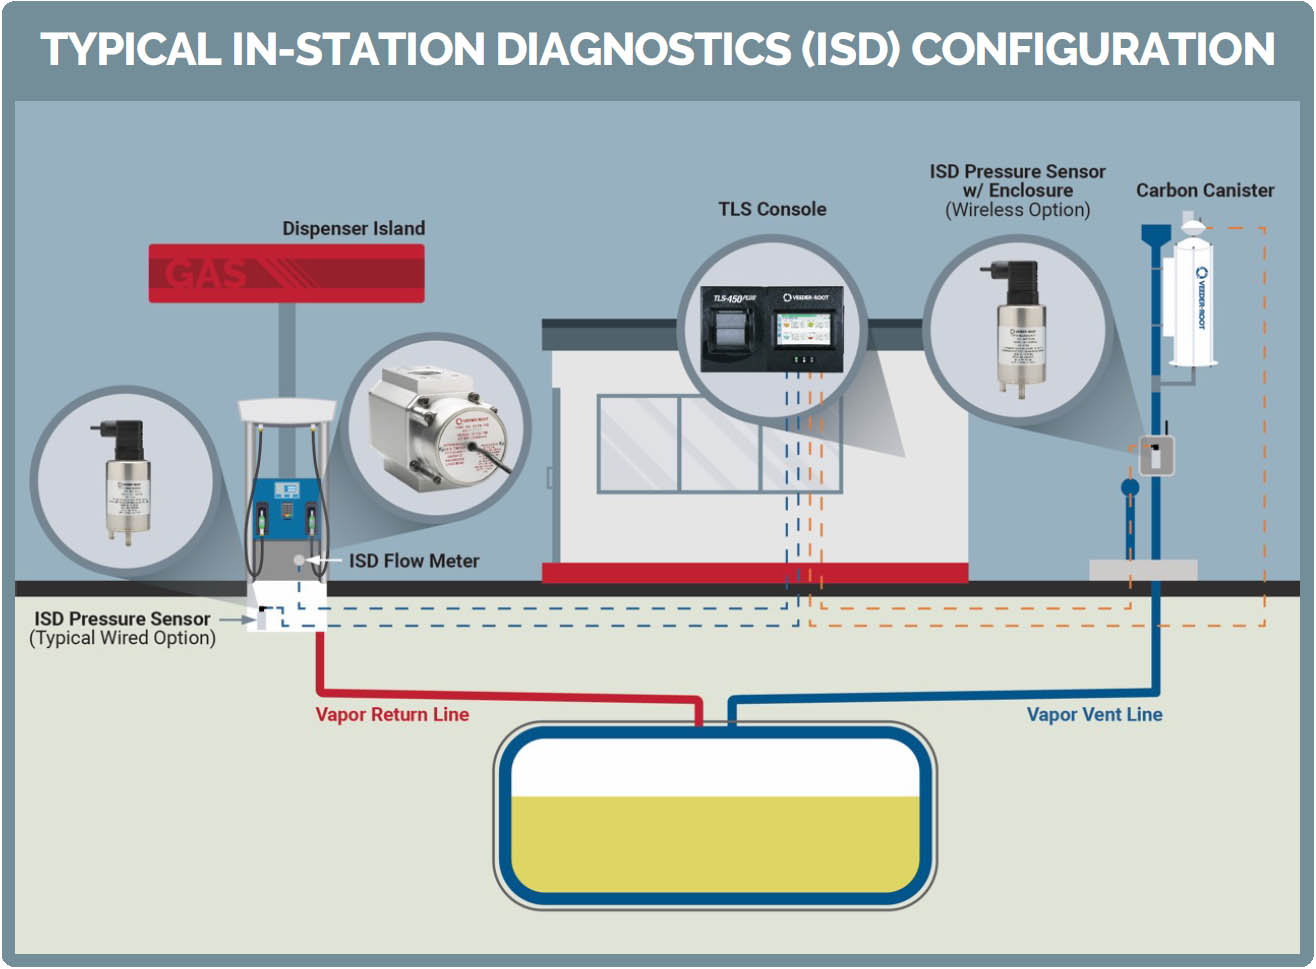 TYPICAL IN-STATION DIAGNOSTICS (ISD) CONFIGURATION